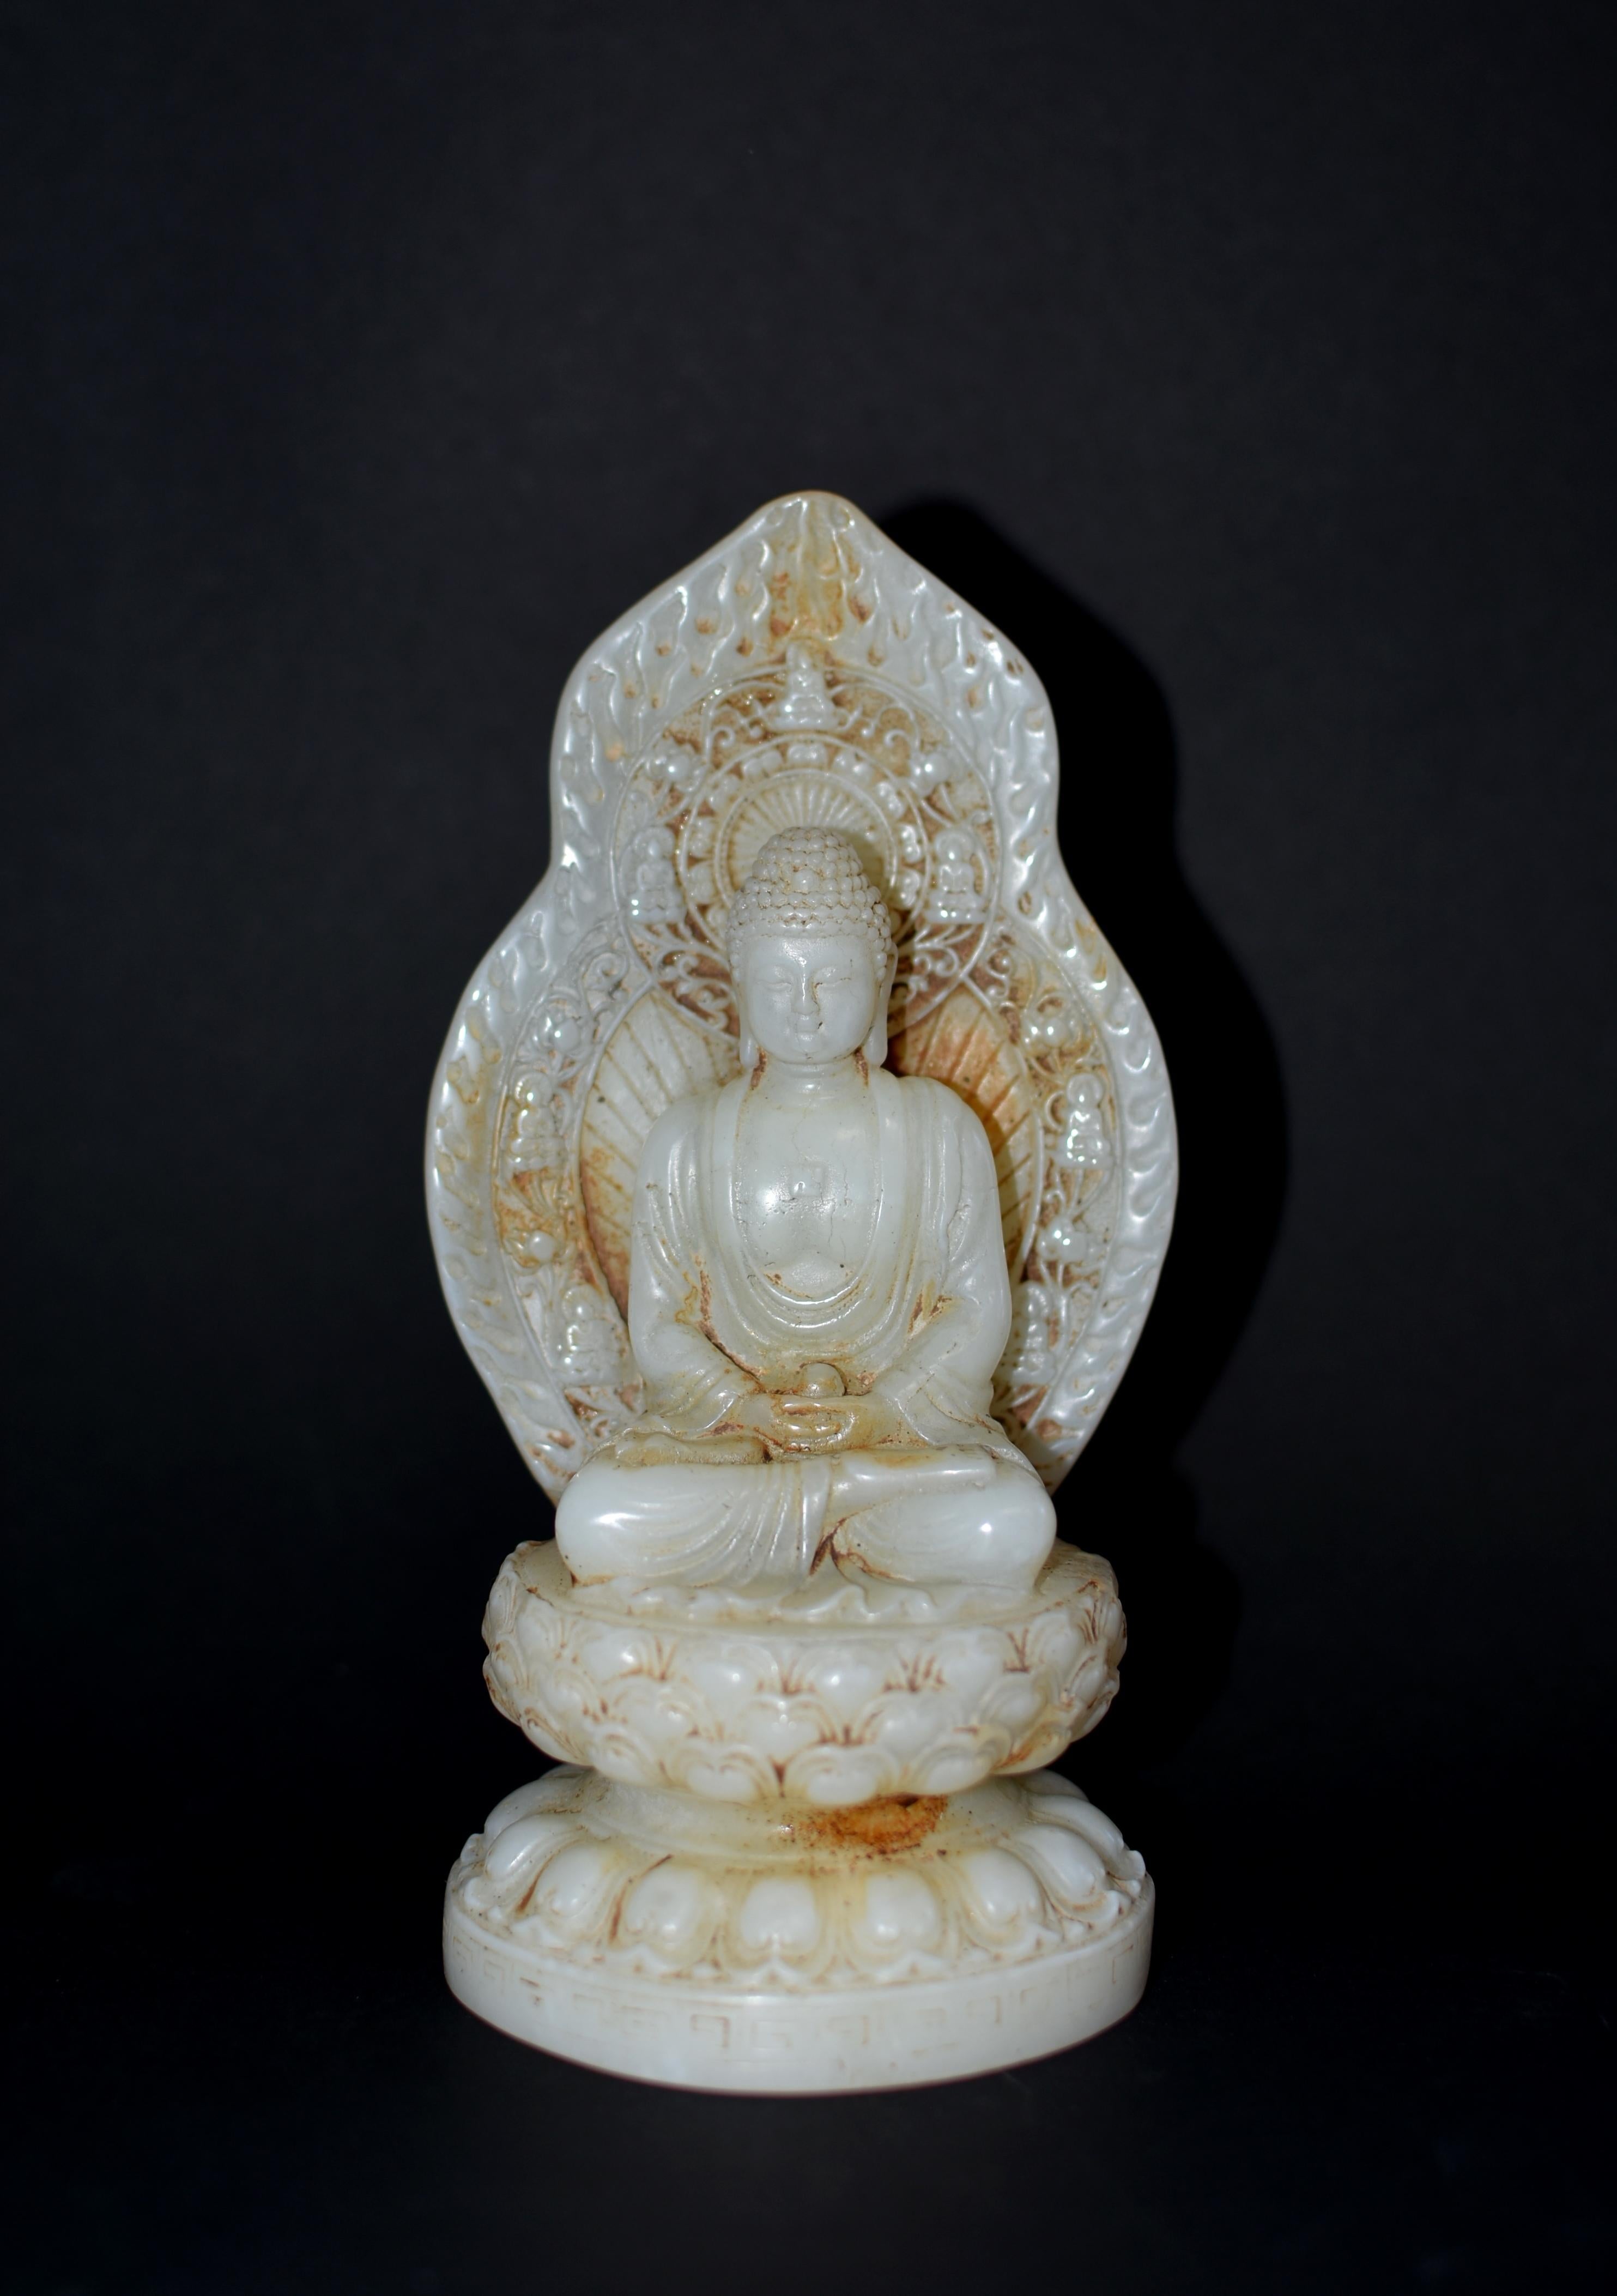 A beautiful statue of white jade Buddha seated in dhyanasana on a lotus base above a waisted round lotiform base. The broad face with smiling downcast eyes casting a serene aura, framed by long-lobed ears and beneath neatly coiled hair. Buddha wears